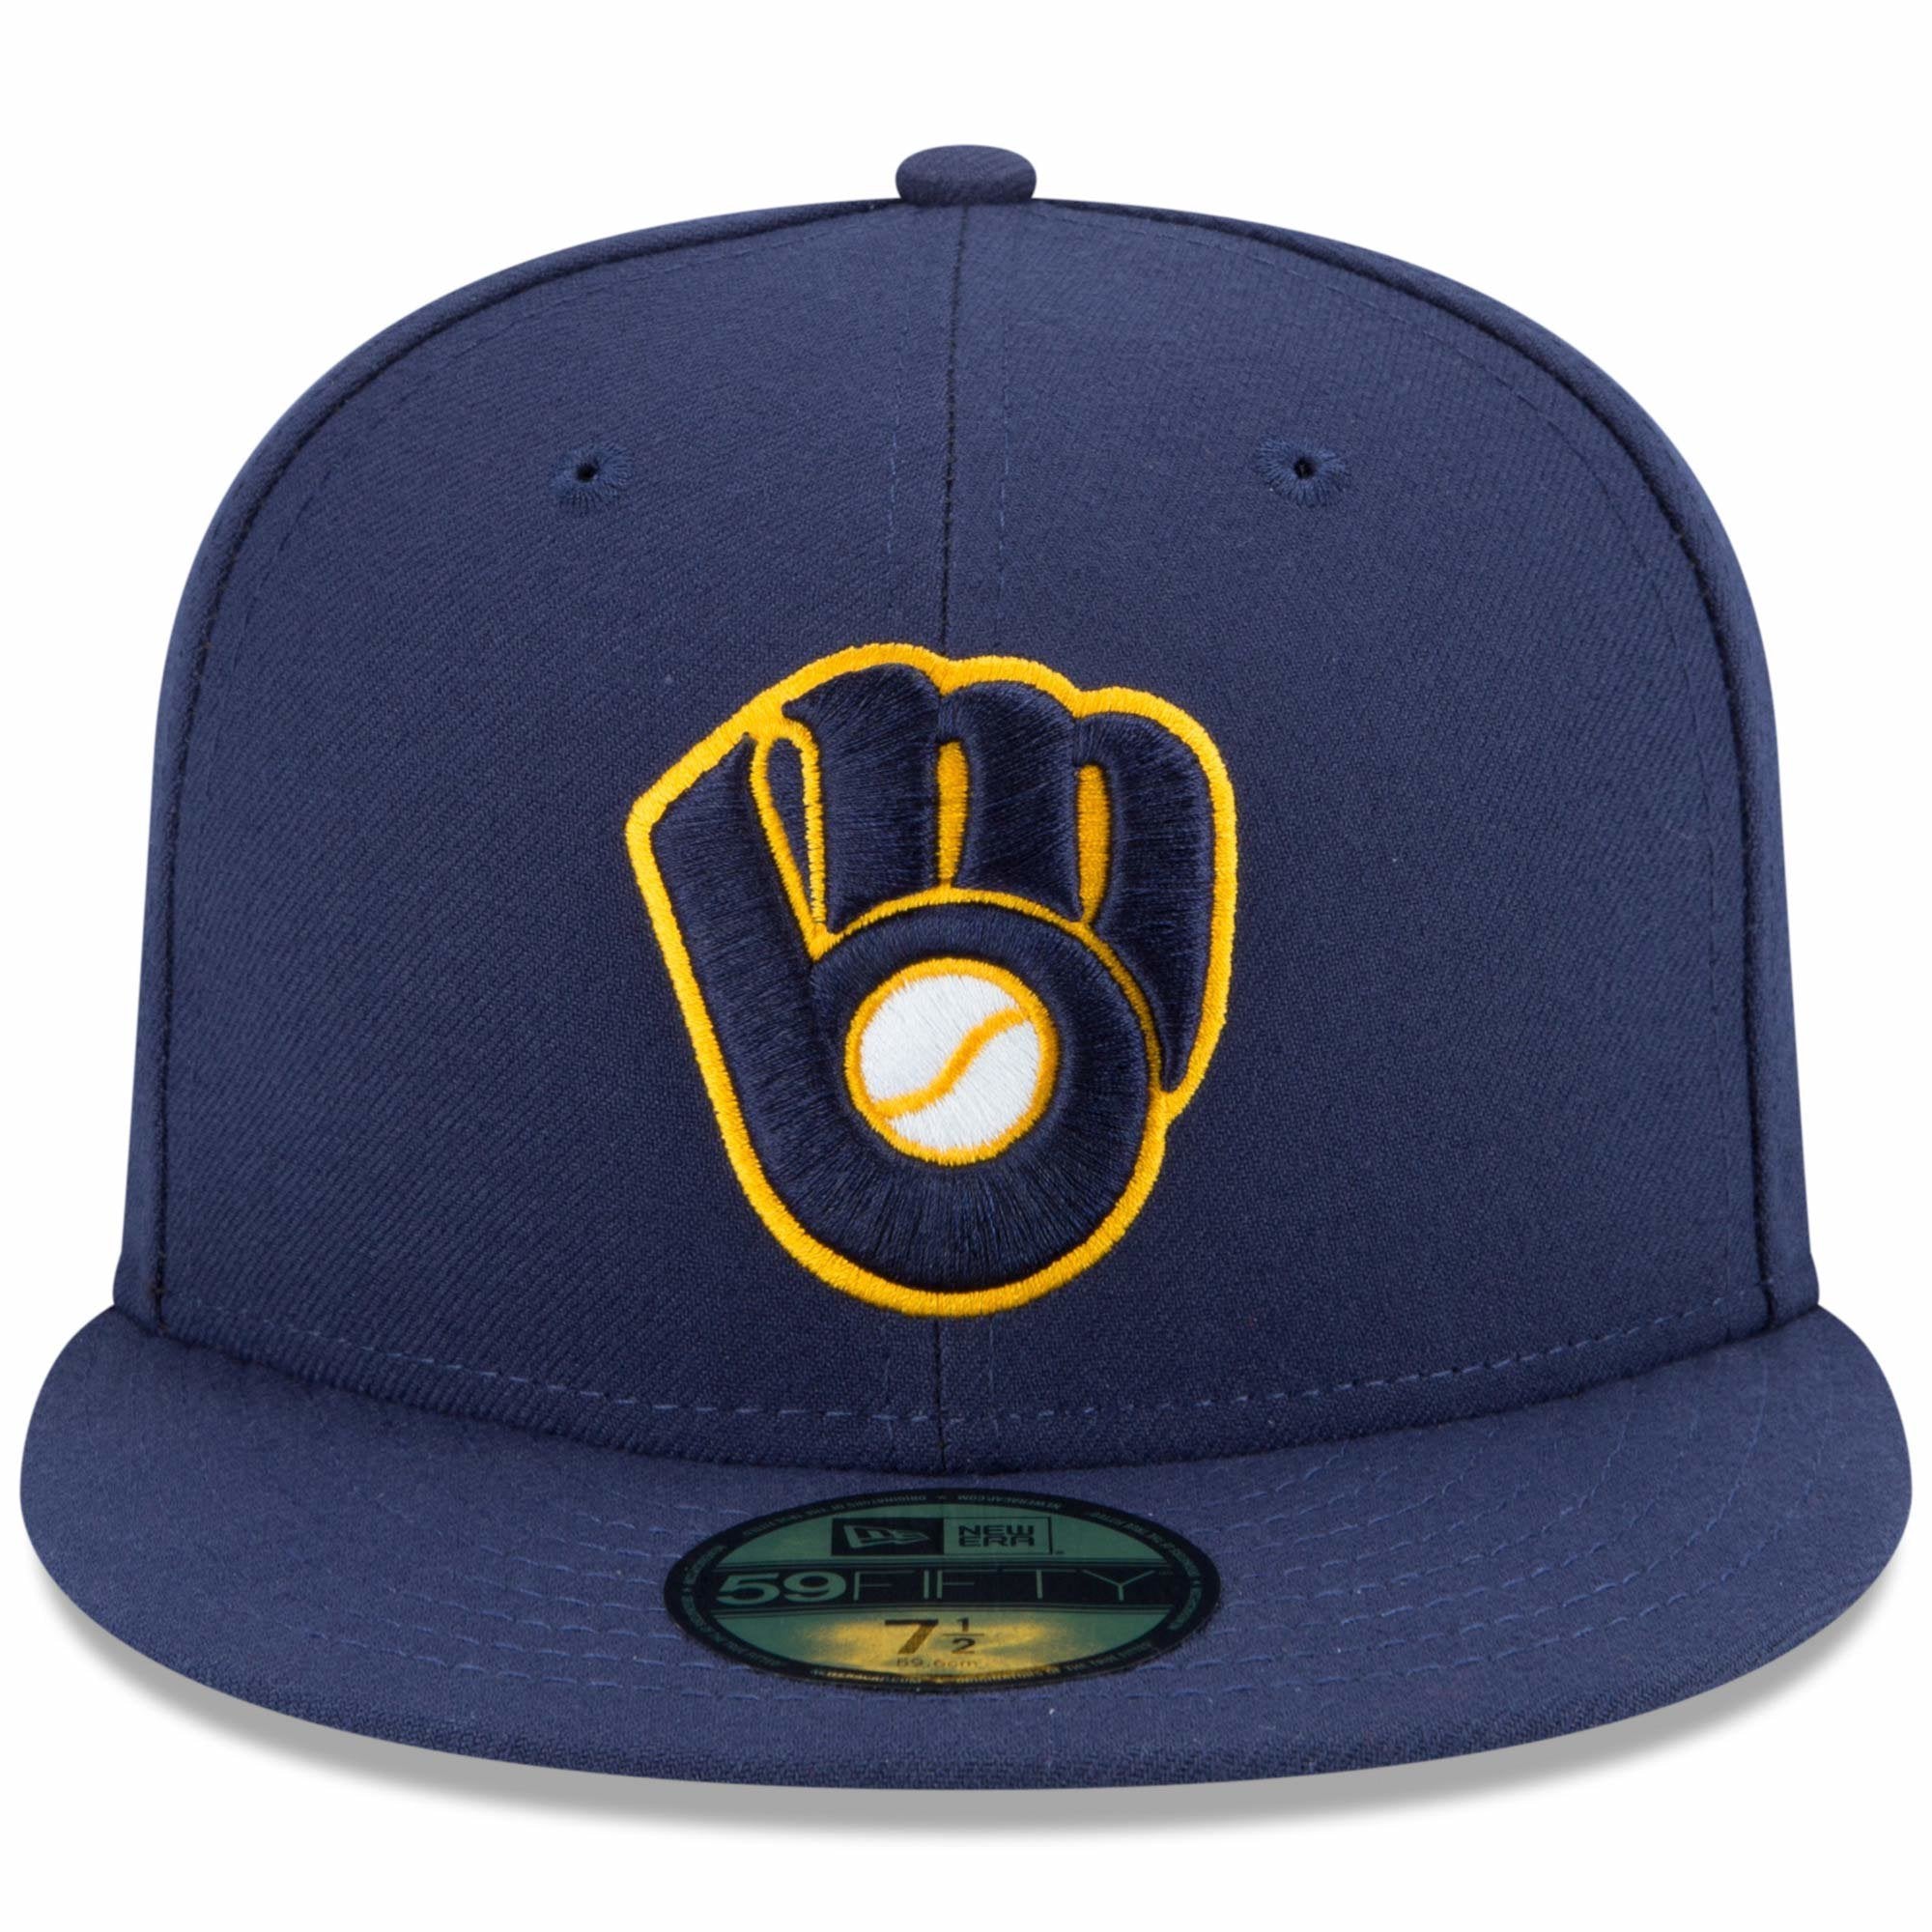 [70361063] Mens New Era MLB Authentic Collection On Field 59FIFTY Fitted Cap Milwaukee Brewers